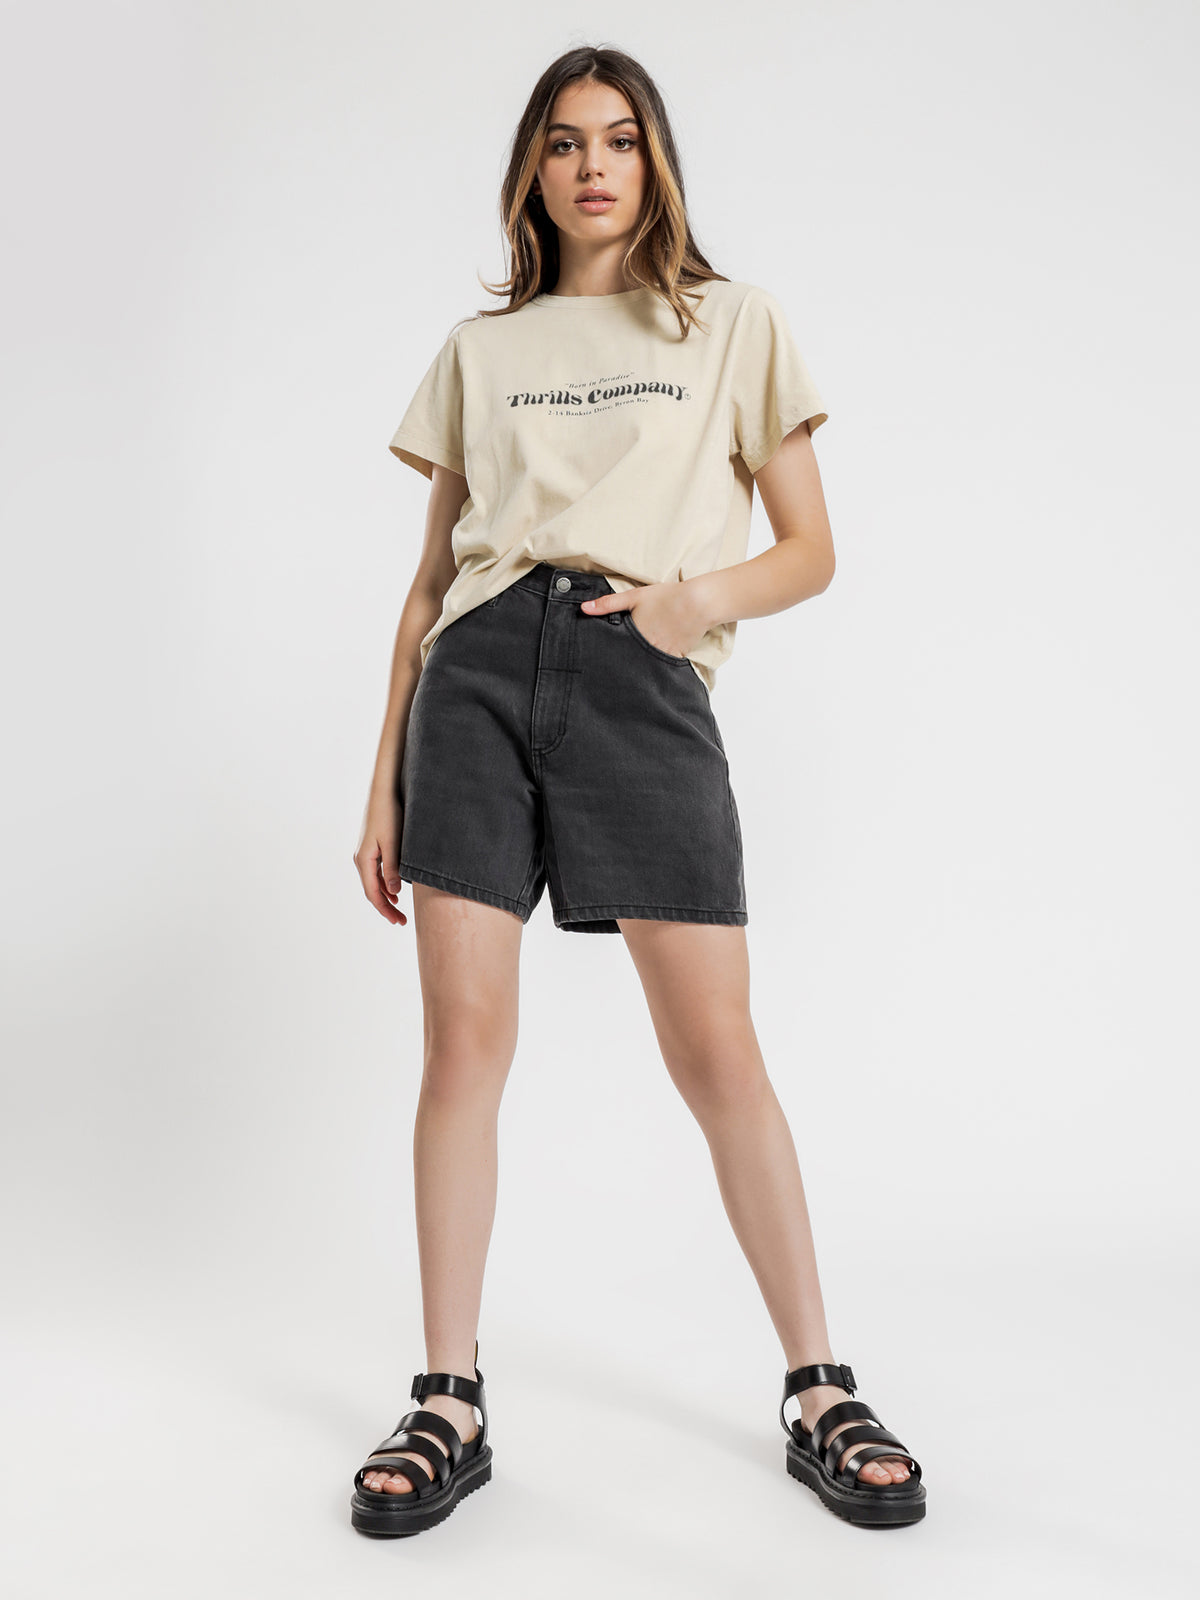 Silo Relaxed T-Shirt in Thrift White